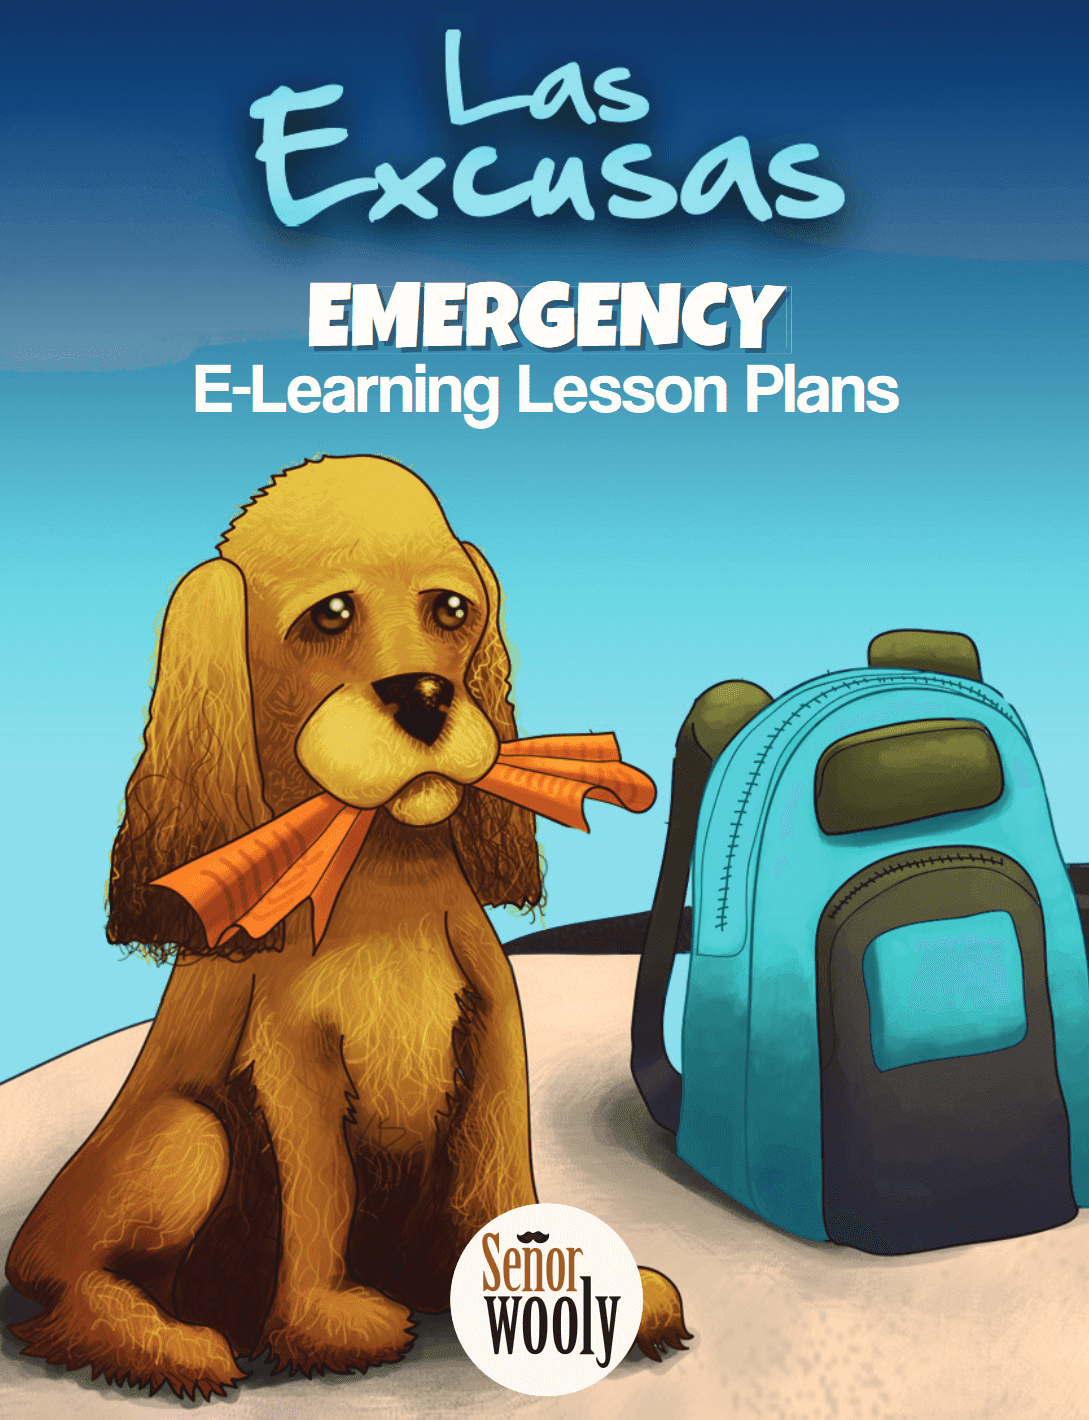 Las excusas Emergency e-learning lesson plans